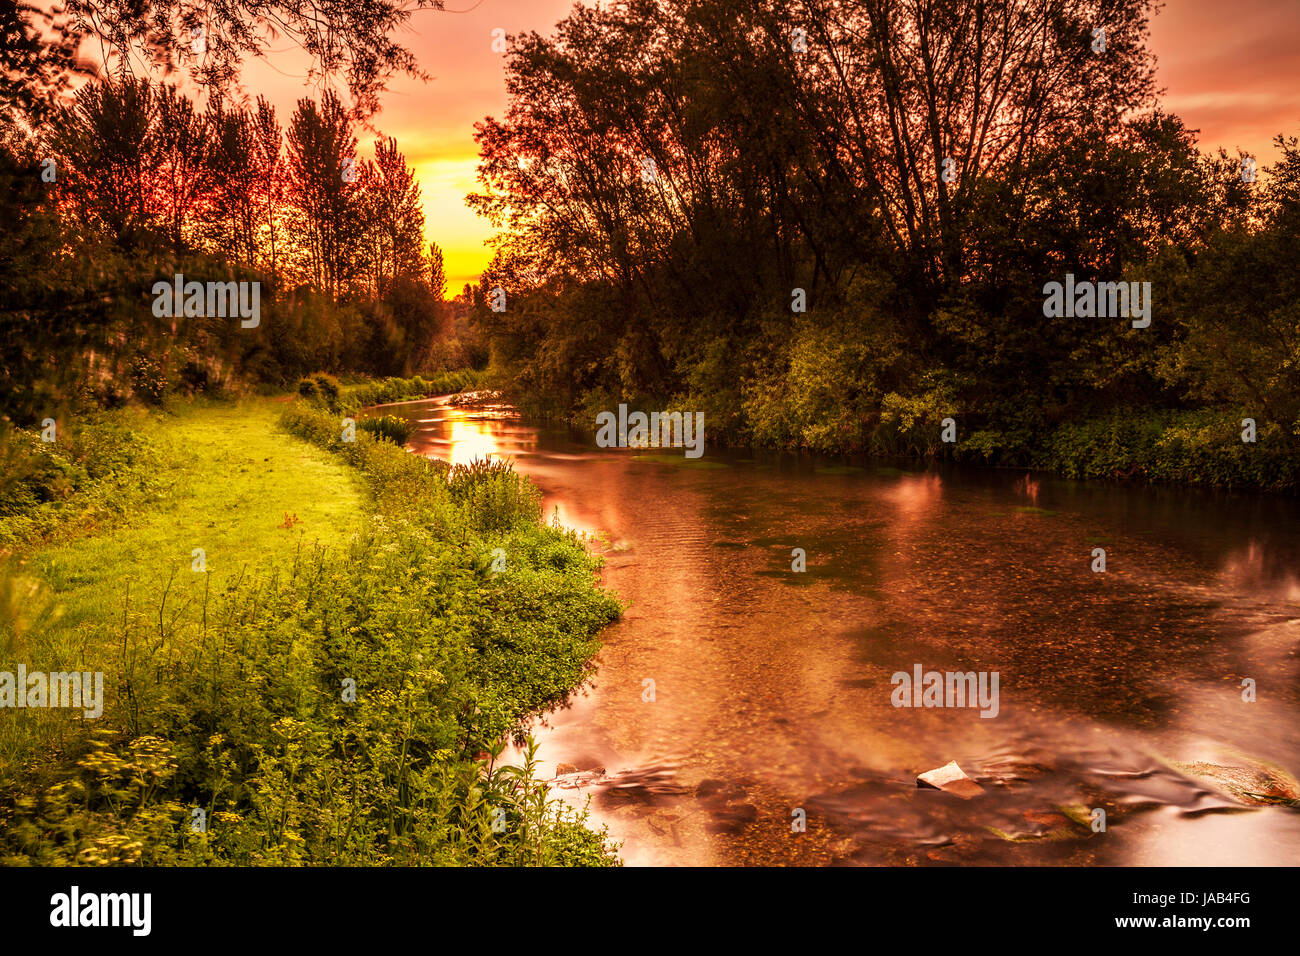 A colourful and dramatic sunrise over the River Kennet in Wiltshire. Stock Photo